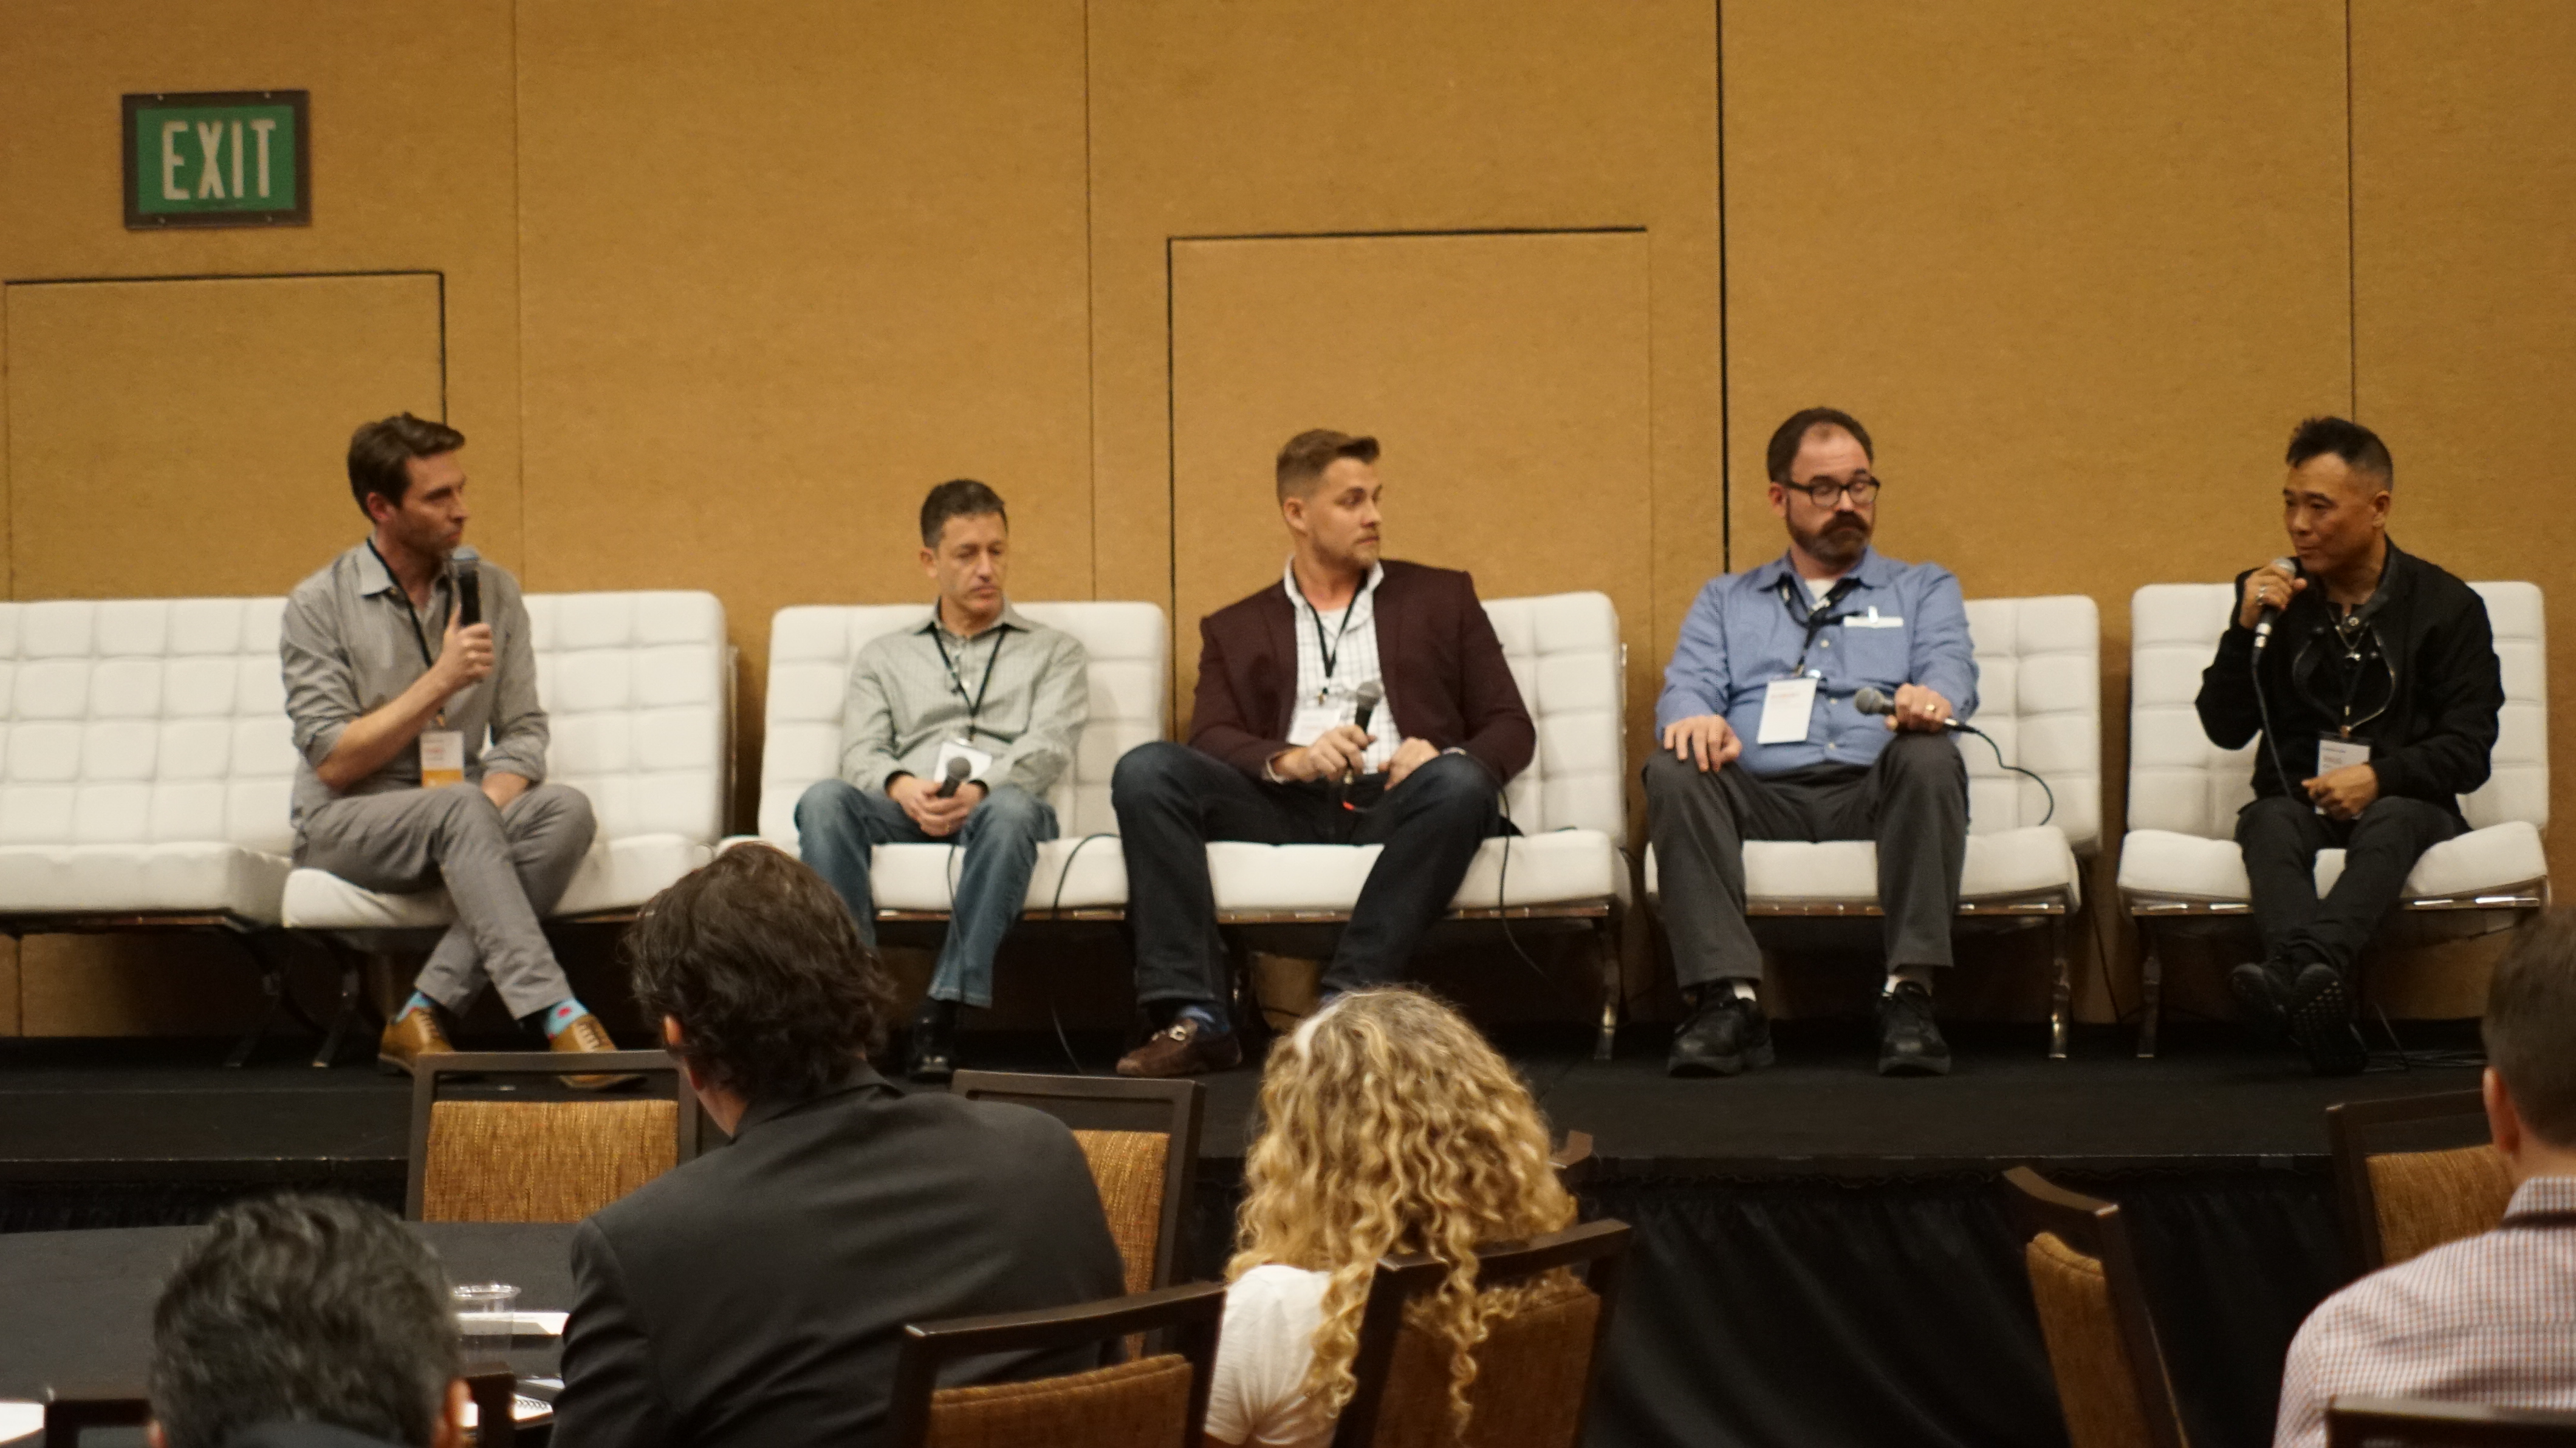 Chris Groshong moderates panels on Blockchain 3.0 with speakers: Robert Steckman, President, Law Office of Robert Steckman, P.C., David Gold, CEO & Co-founder, Dapix, Frank Makrides, Founder & CEO, Tunnel, Charles Wismer, Co-founder, Ledger Leap, and Paul Kim, Managing Director, ICO Advisory, Blockchain Industries, Inc.